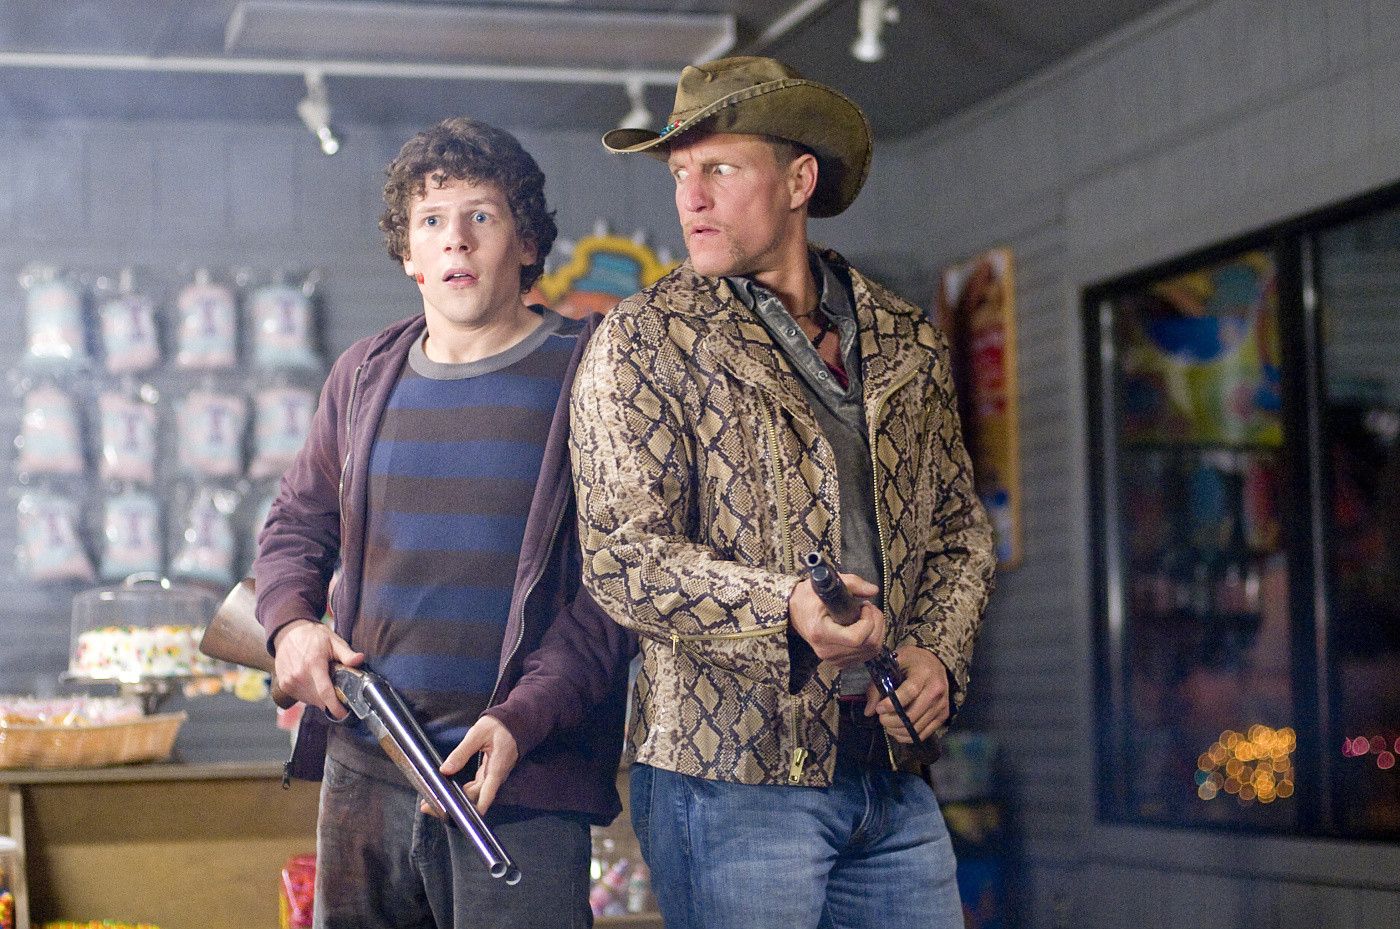 How 'Zombieland Double Tap' Ruined Something We Once Enjoyed